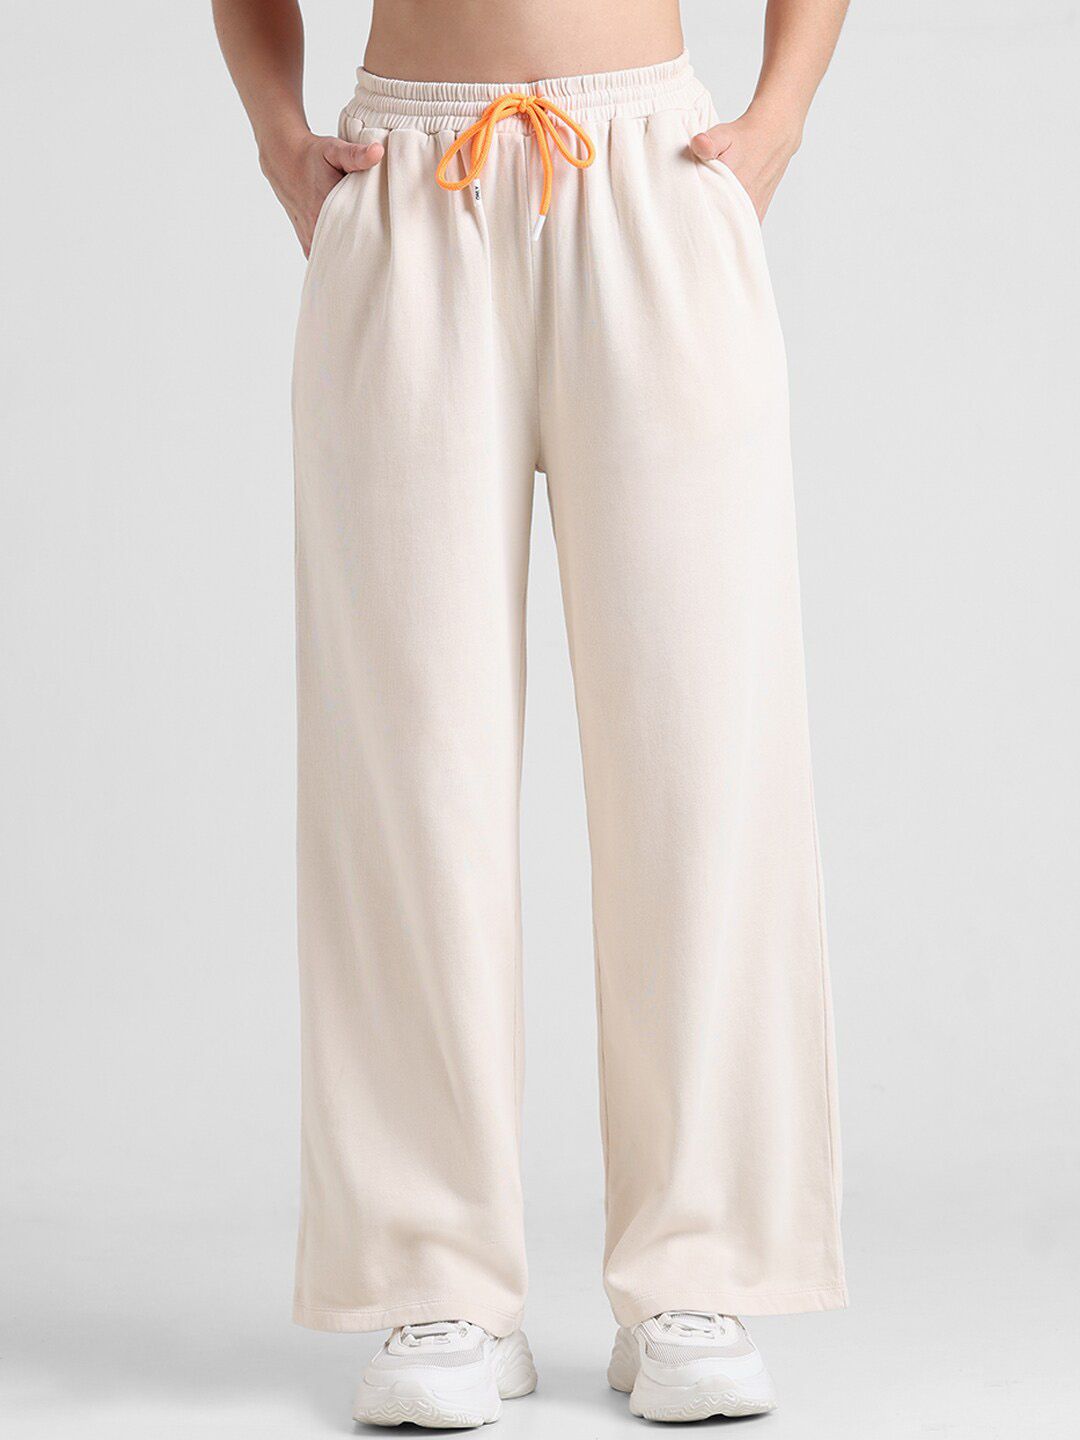 ONLY Women Beige Flared High-Rise Trousers Price in India